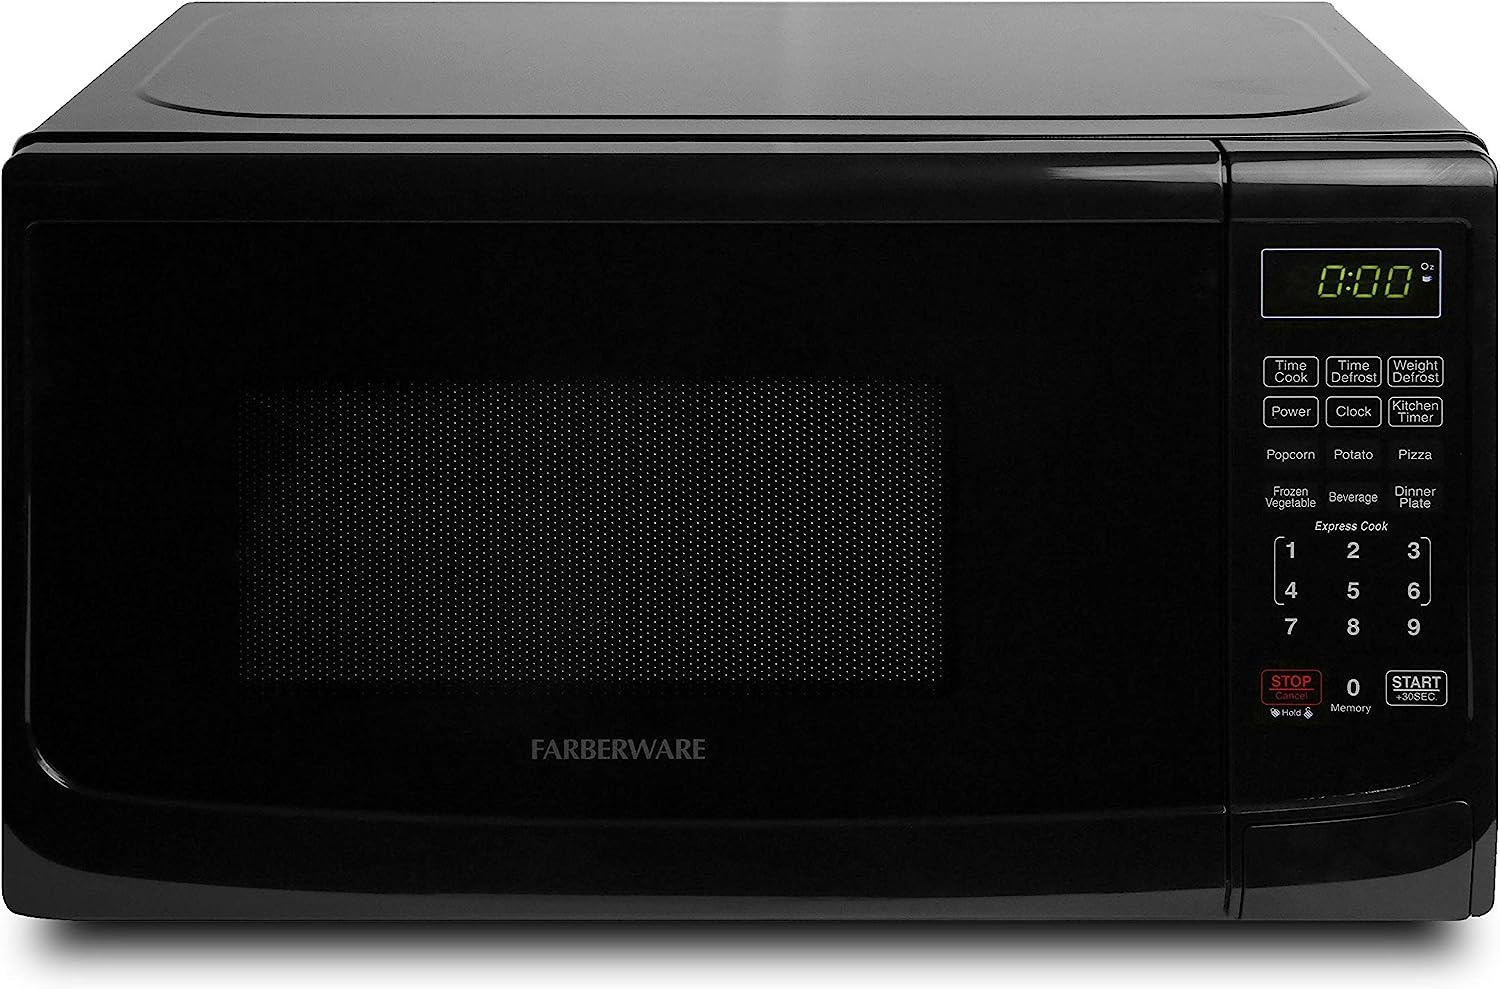 https://bigbigmart.com/wp-content/uploads/2023/07/Farberware-Countertop-Microwave-700-Watts-0.7-cu-ft-Microwave-Oven-With-LED-Lighting-and-Child-Lock-Perfect-for-Apartments-and-Dorms-Easy-Clean-Grey-Interior-Retro-Black.jpg